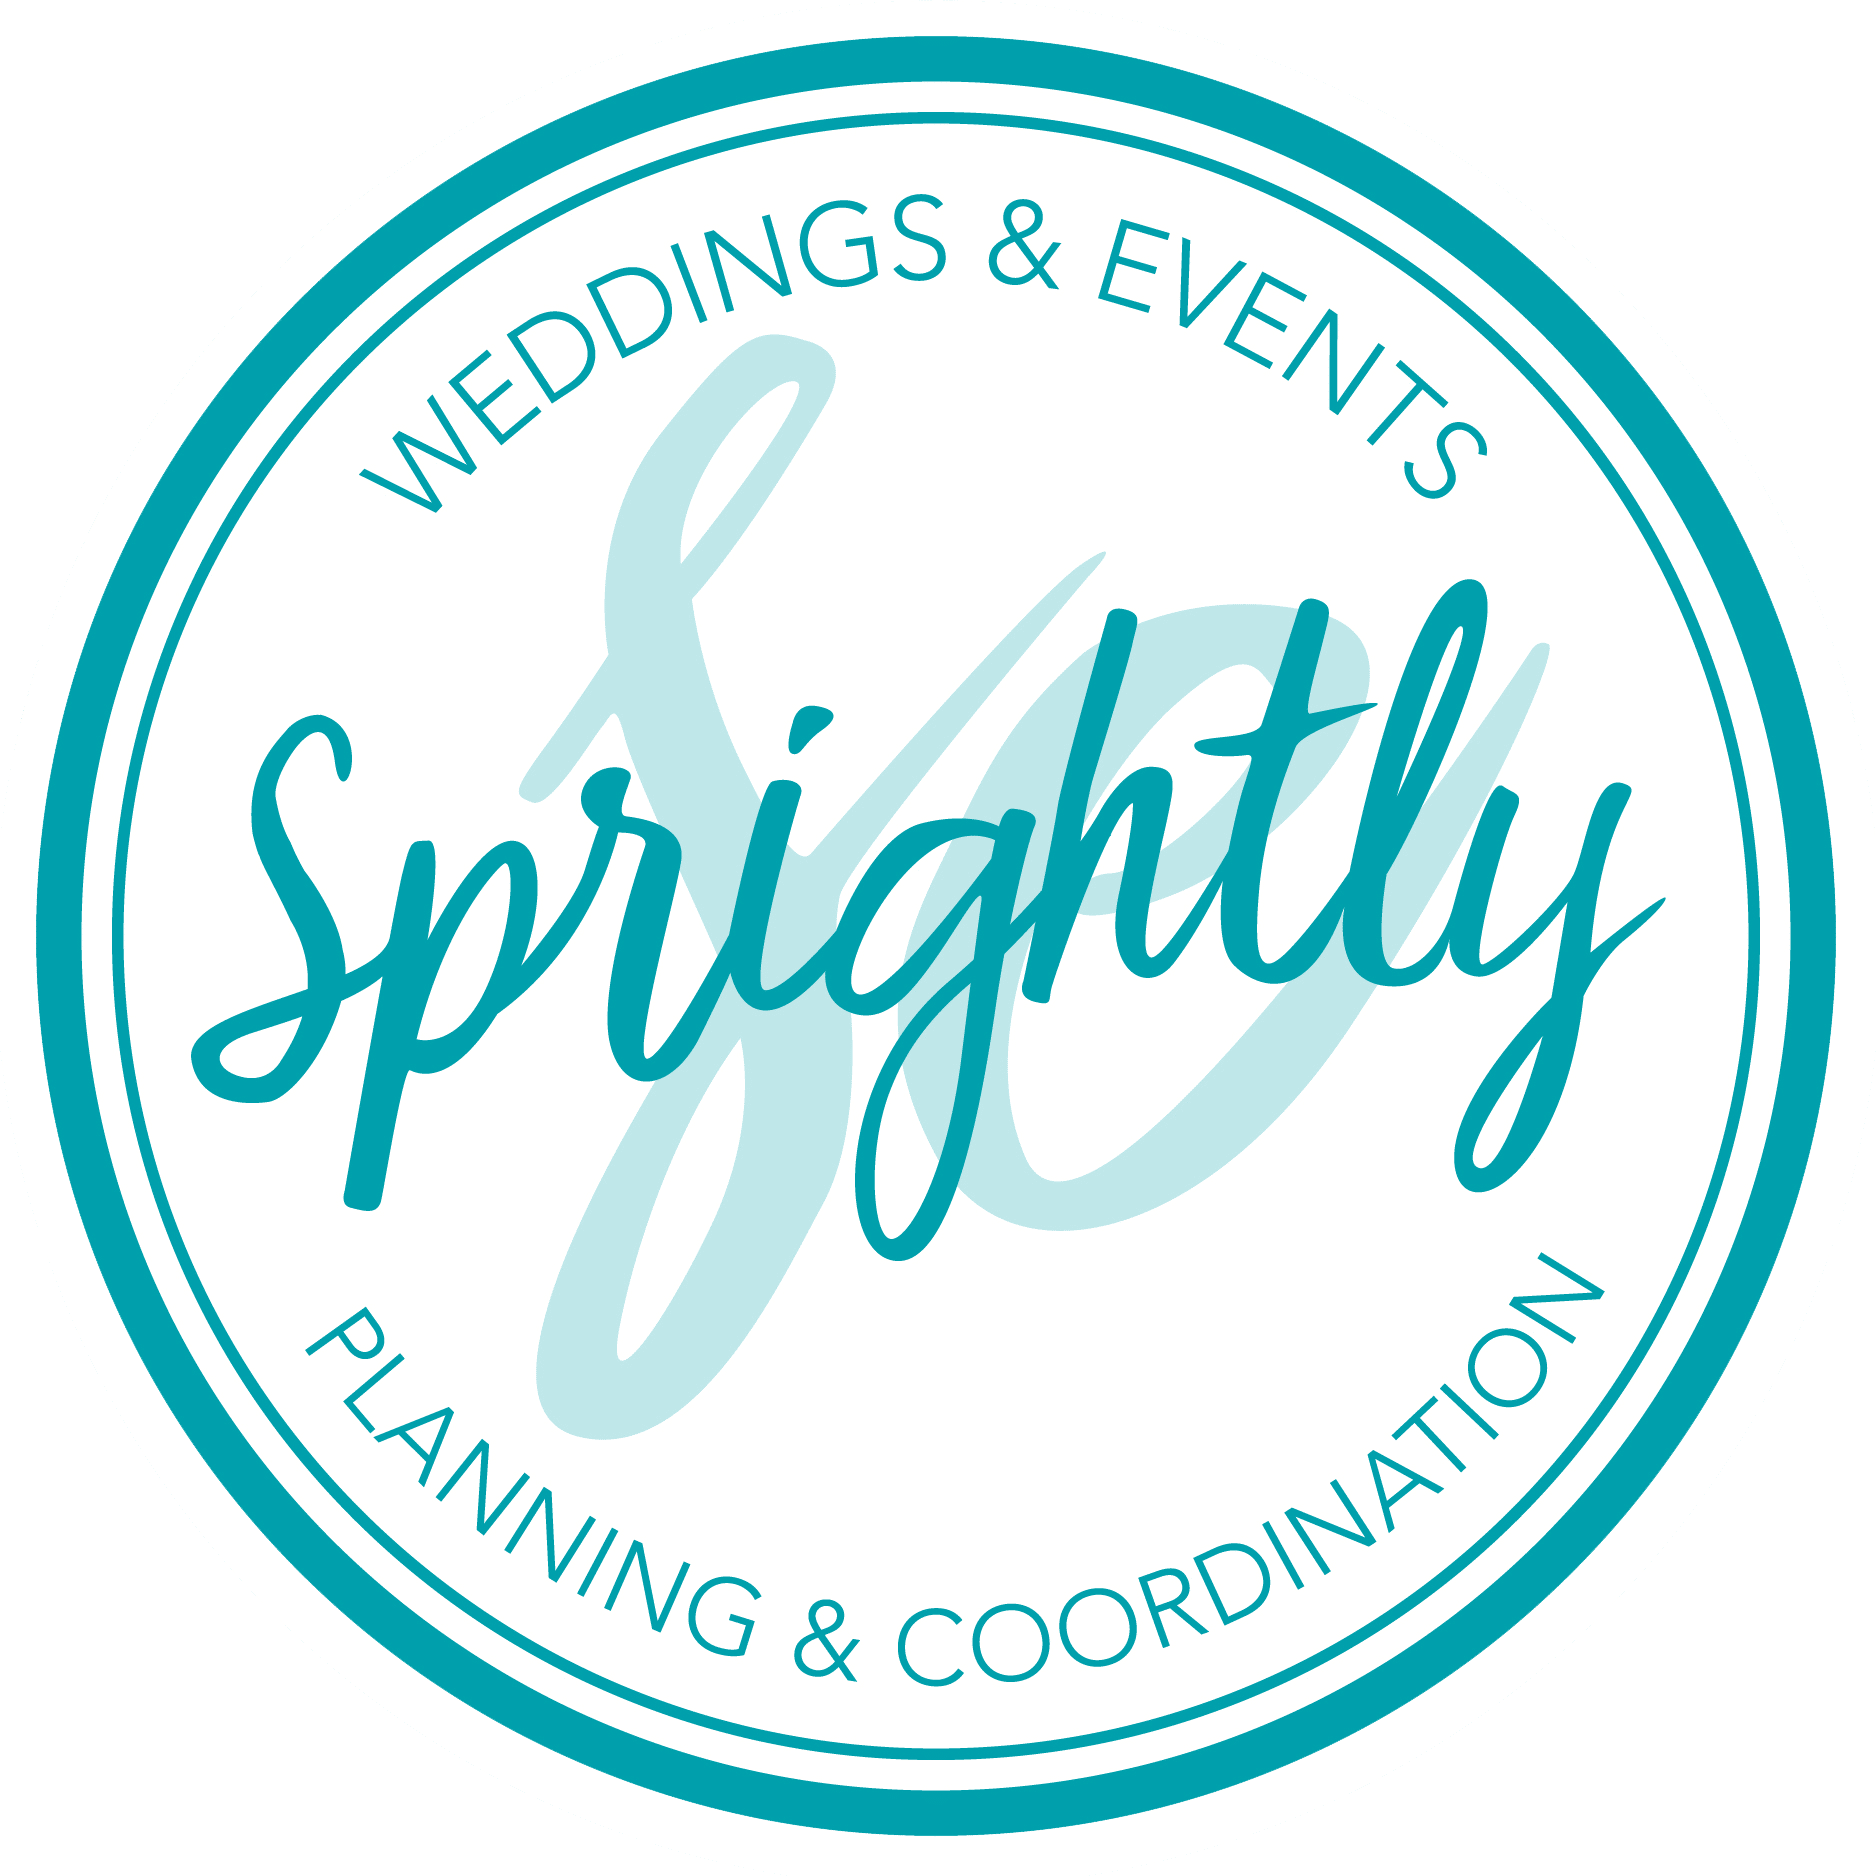 Sprightly Events